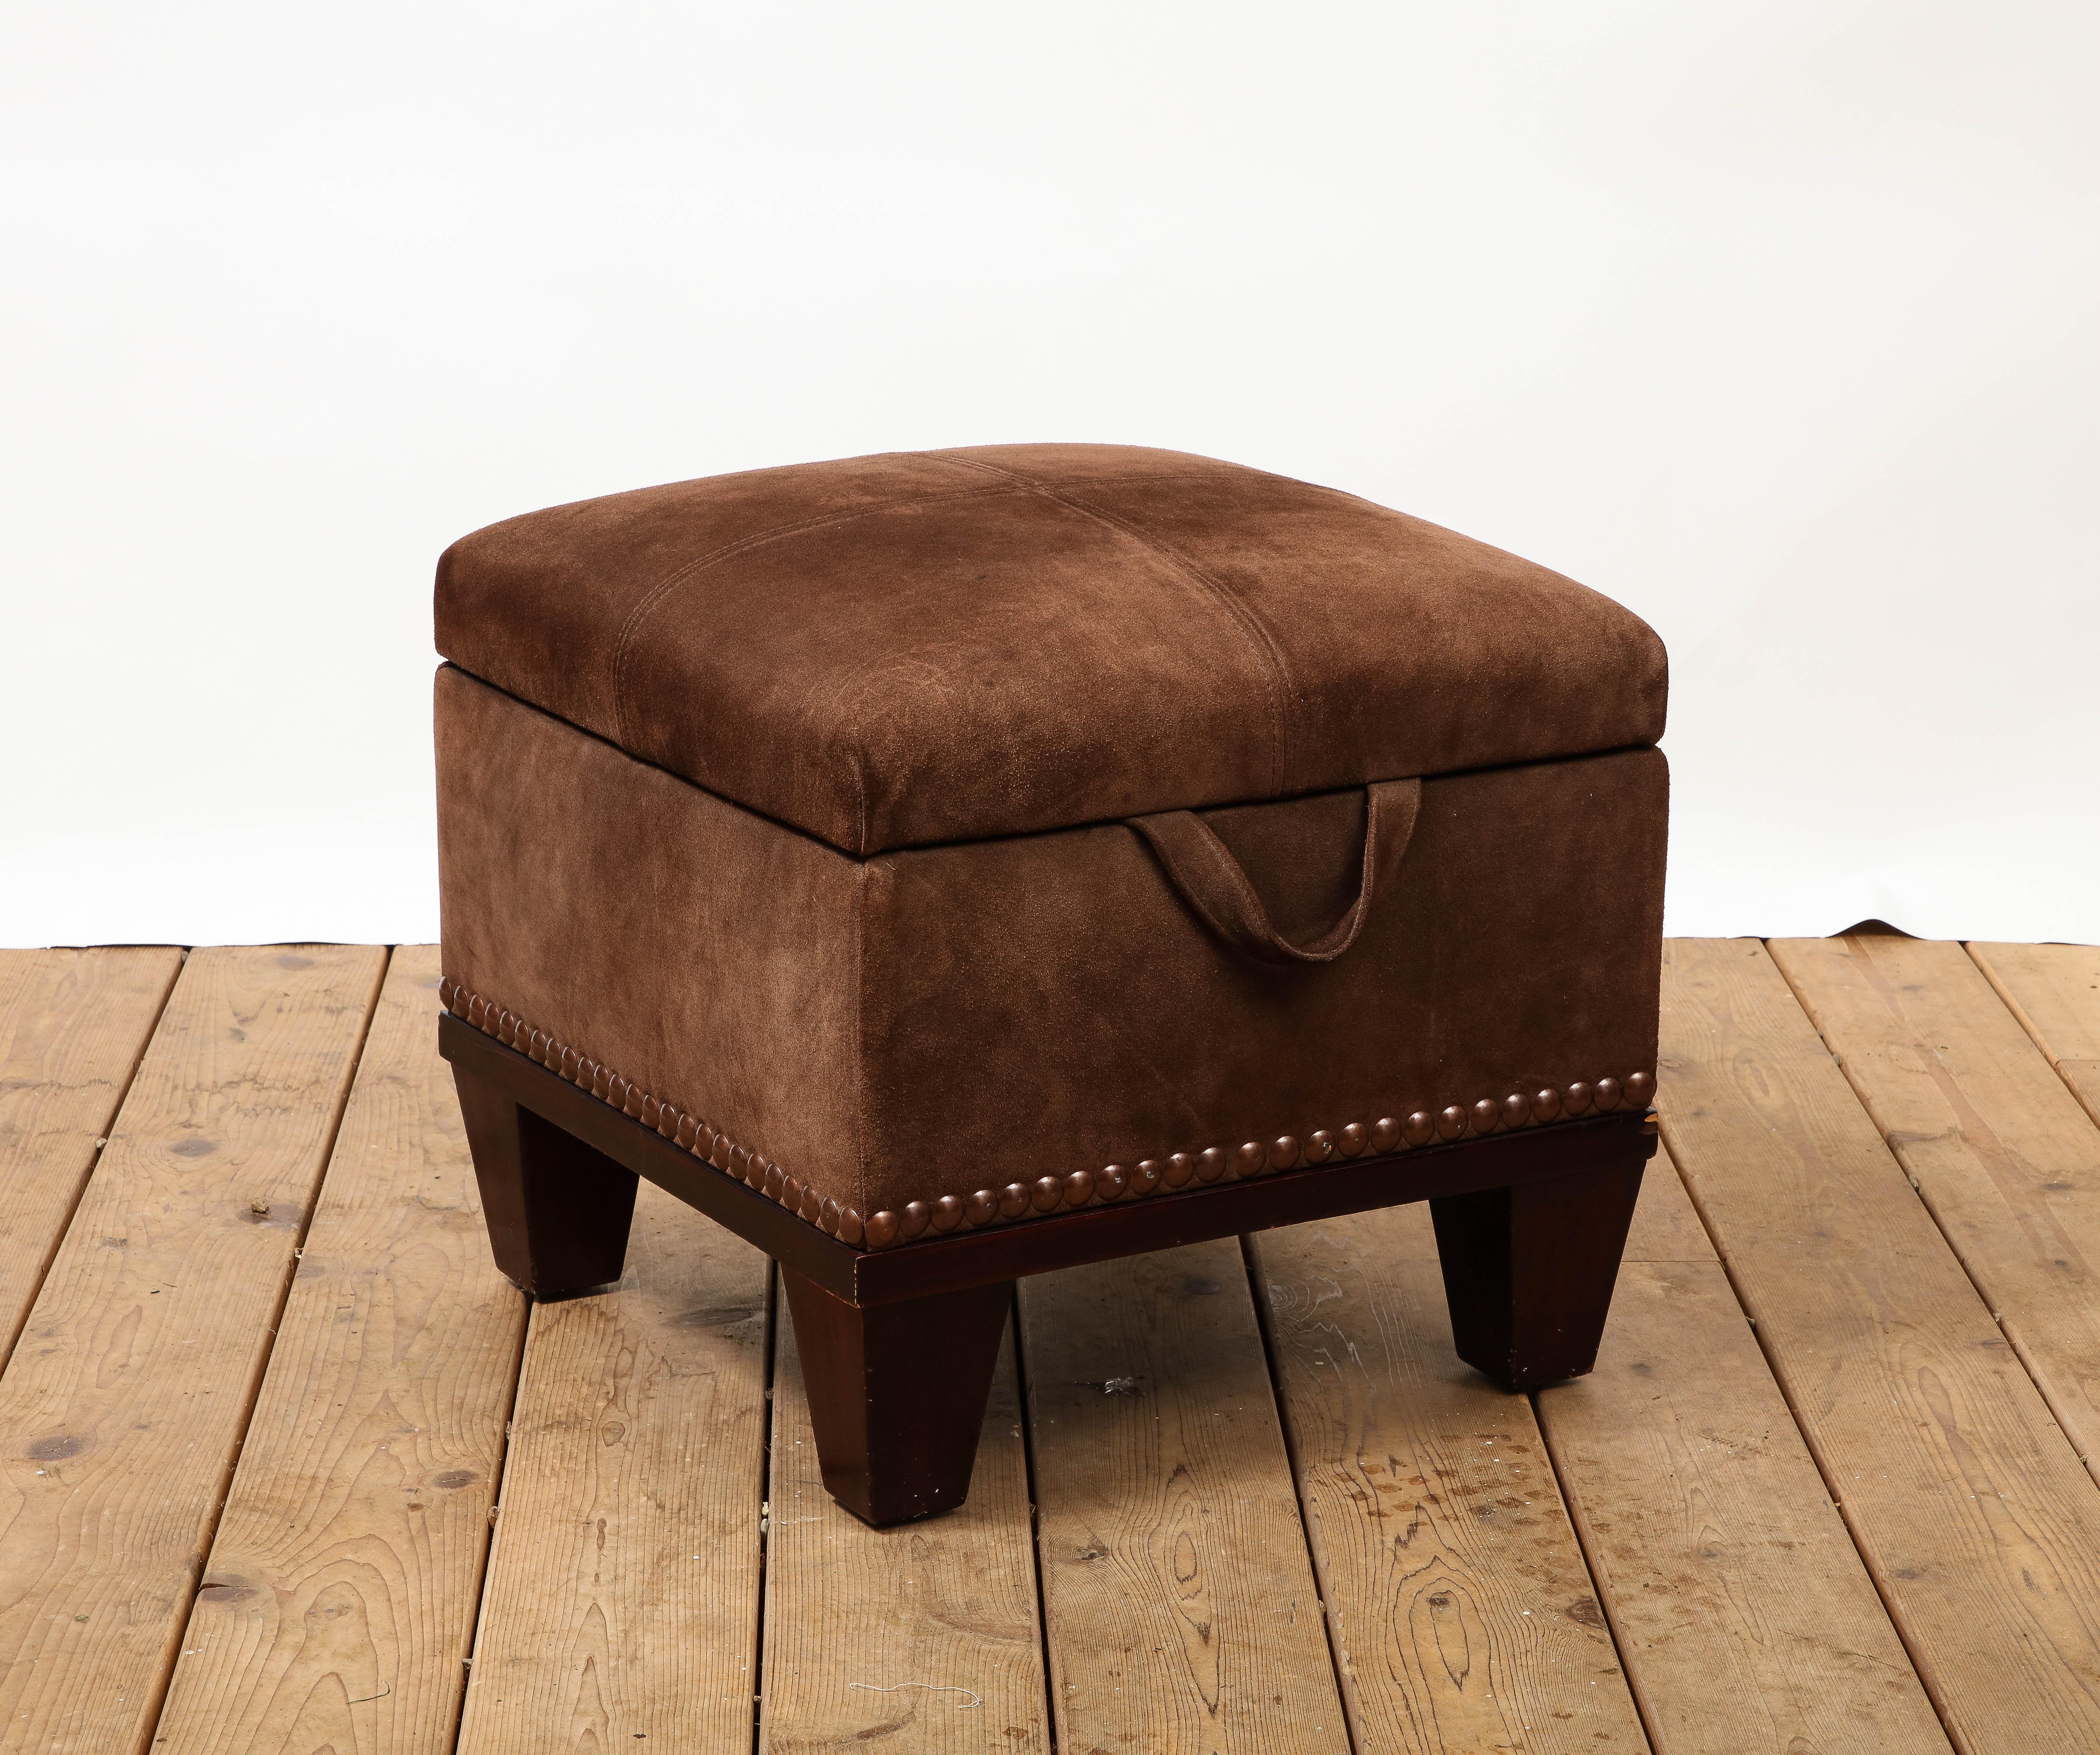 George Smith Baby Moderne Empire Chest in brown suede with French natural nail head detail. Charming foot stool / storage ottoman. 